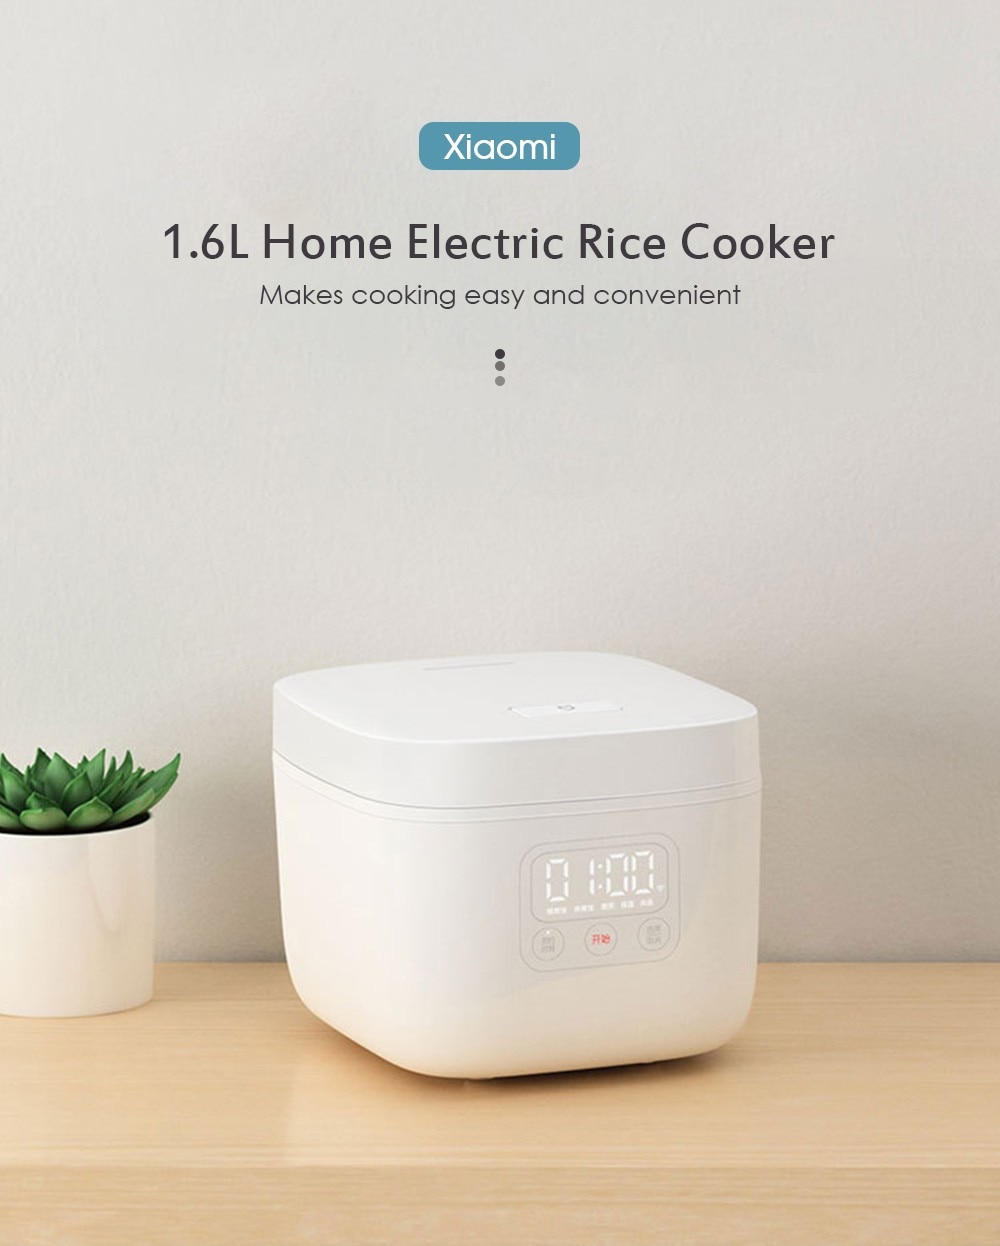 Hot Sell Xiaomi Mijia 1.6L Electric Rice Cooker Kitchen Mini Cooker Small Rice Cook Machine Intelligent Appointment LED Display